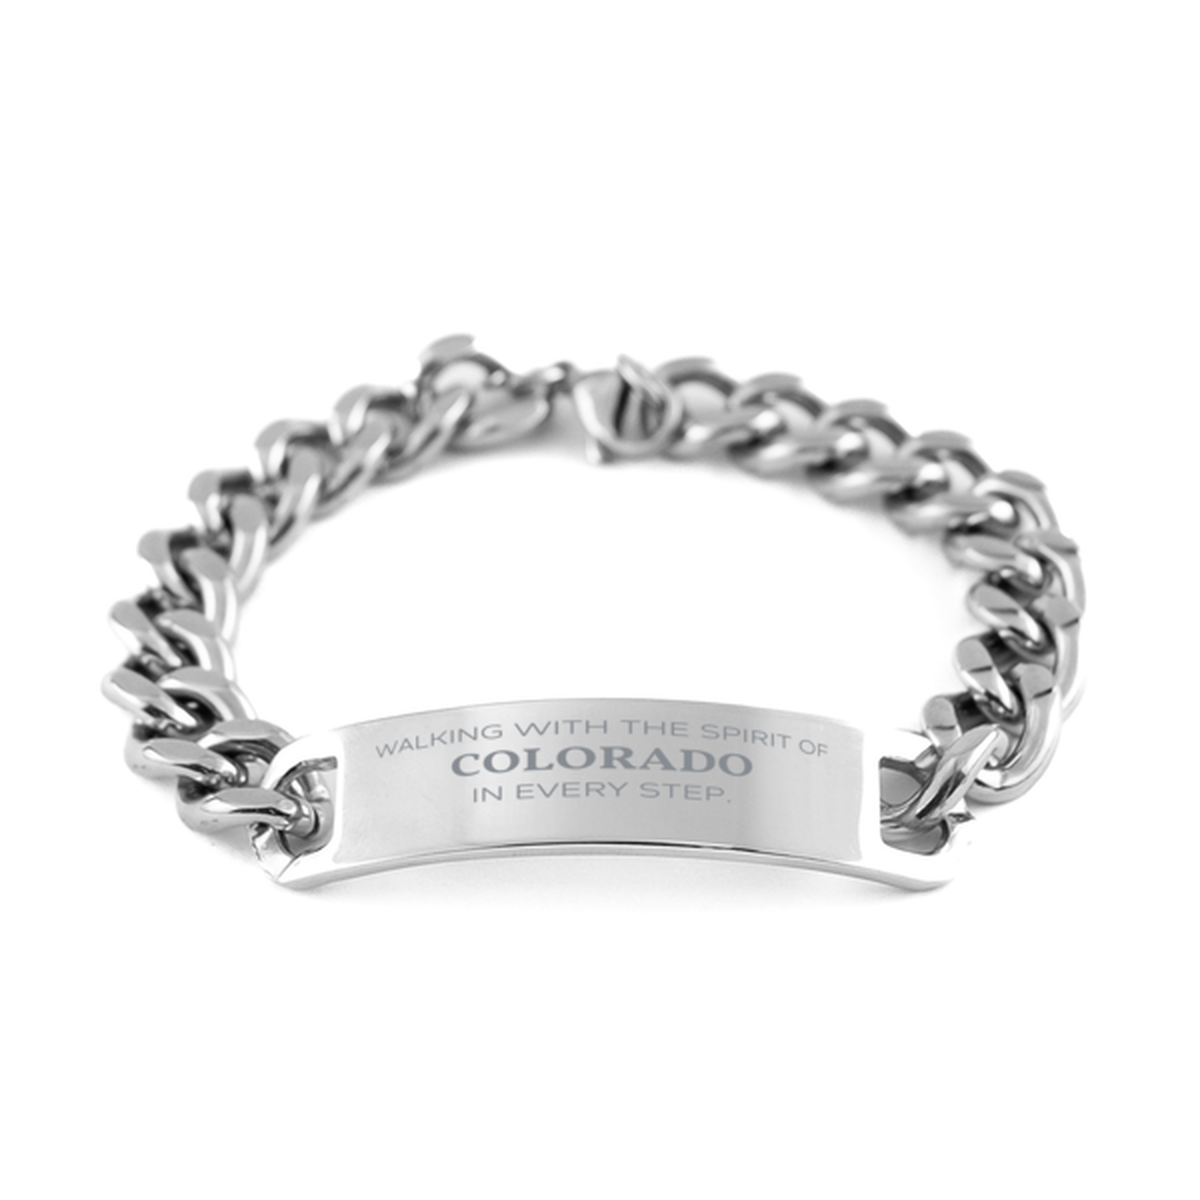 Colorado Gifts, Walking with the spirit, Love Colorado Birthday Christmas Cuban Chain Stainless Steel Bracelet For Colorado People, Men, Women, Friends